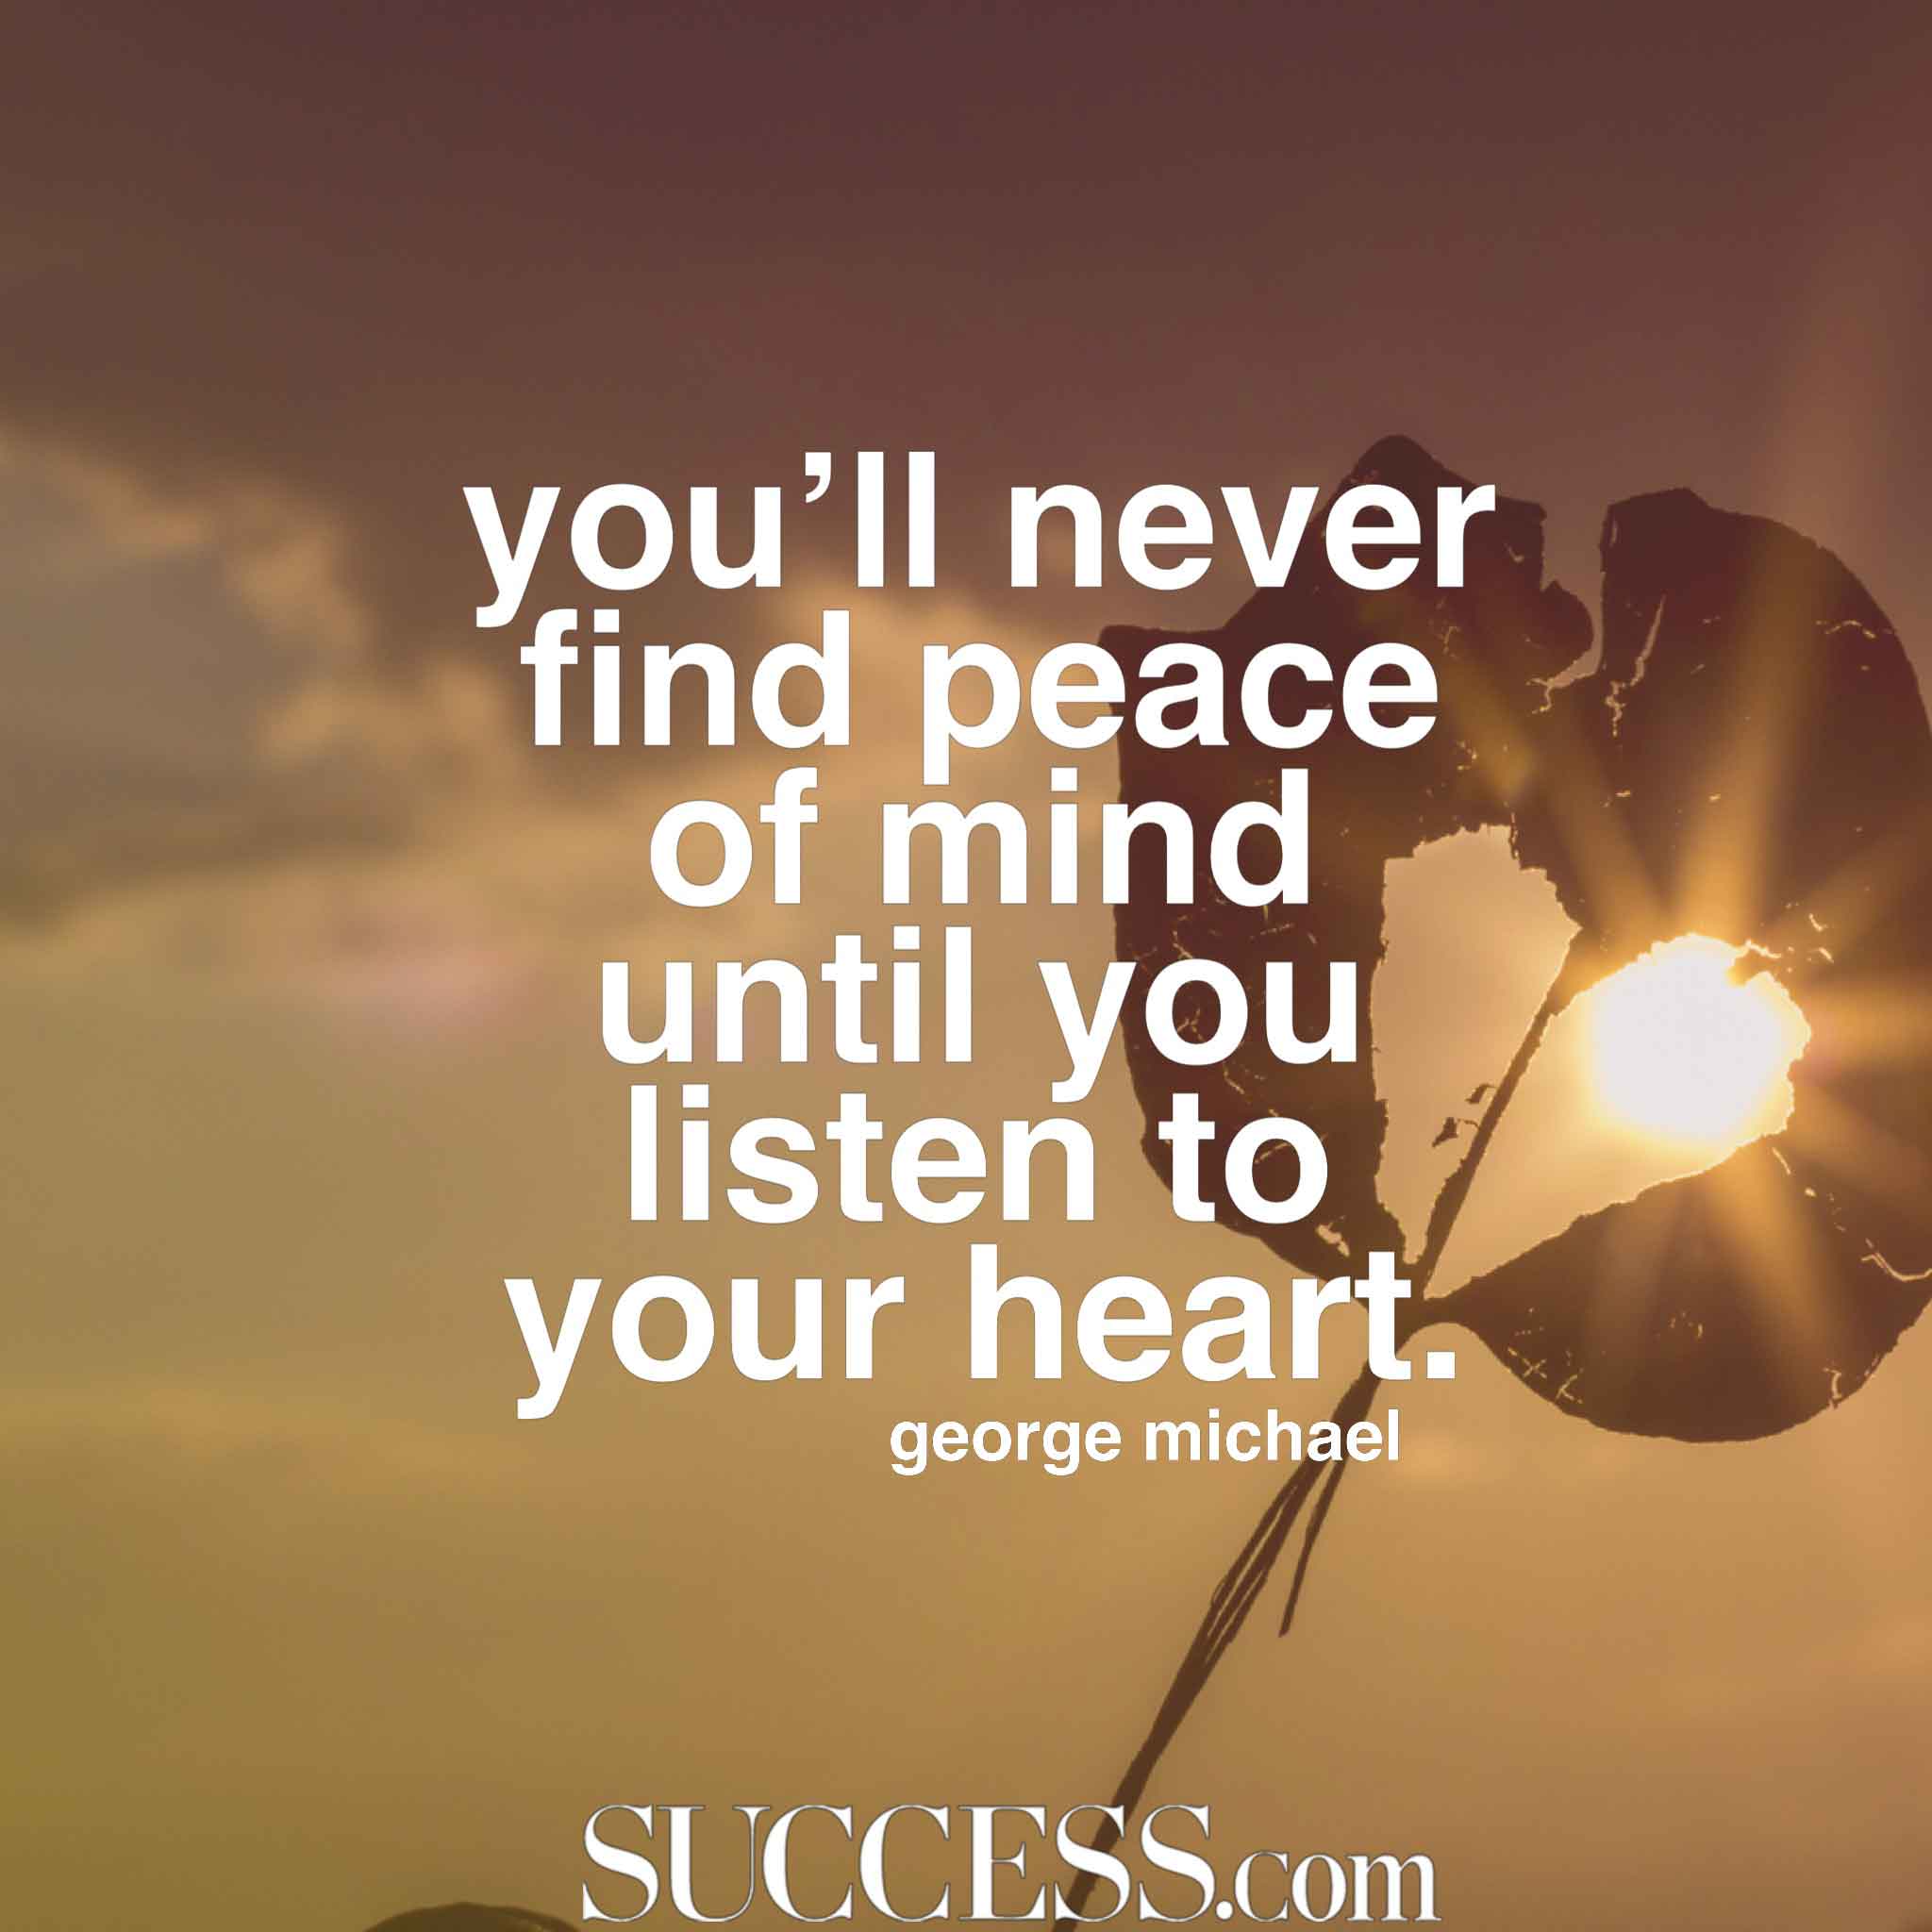 you’ll never find peace of mind until you listen to your heart. george michael